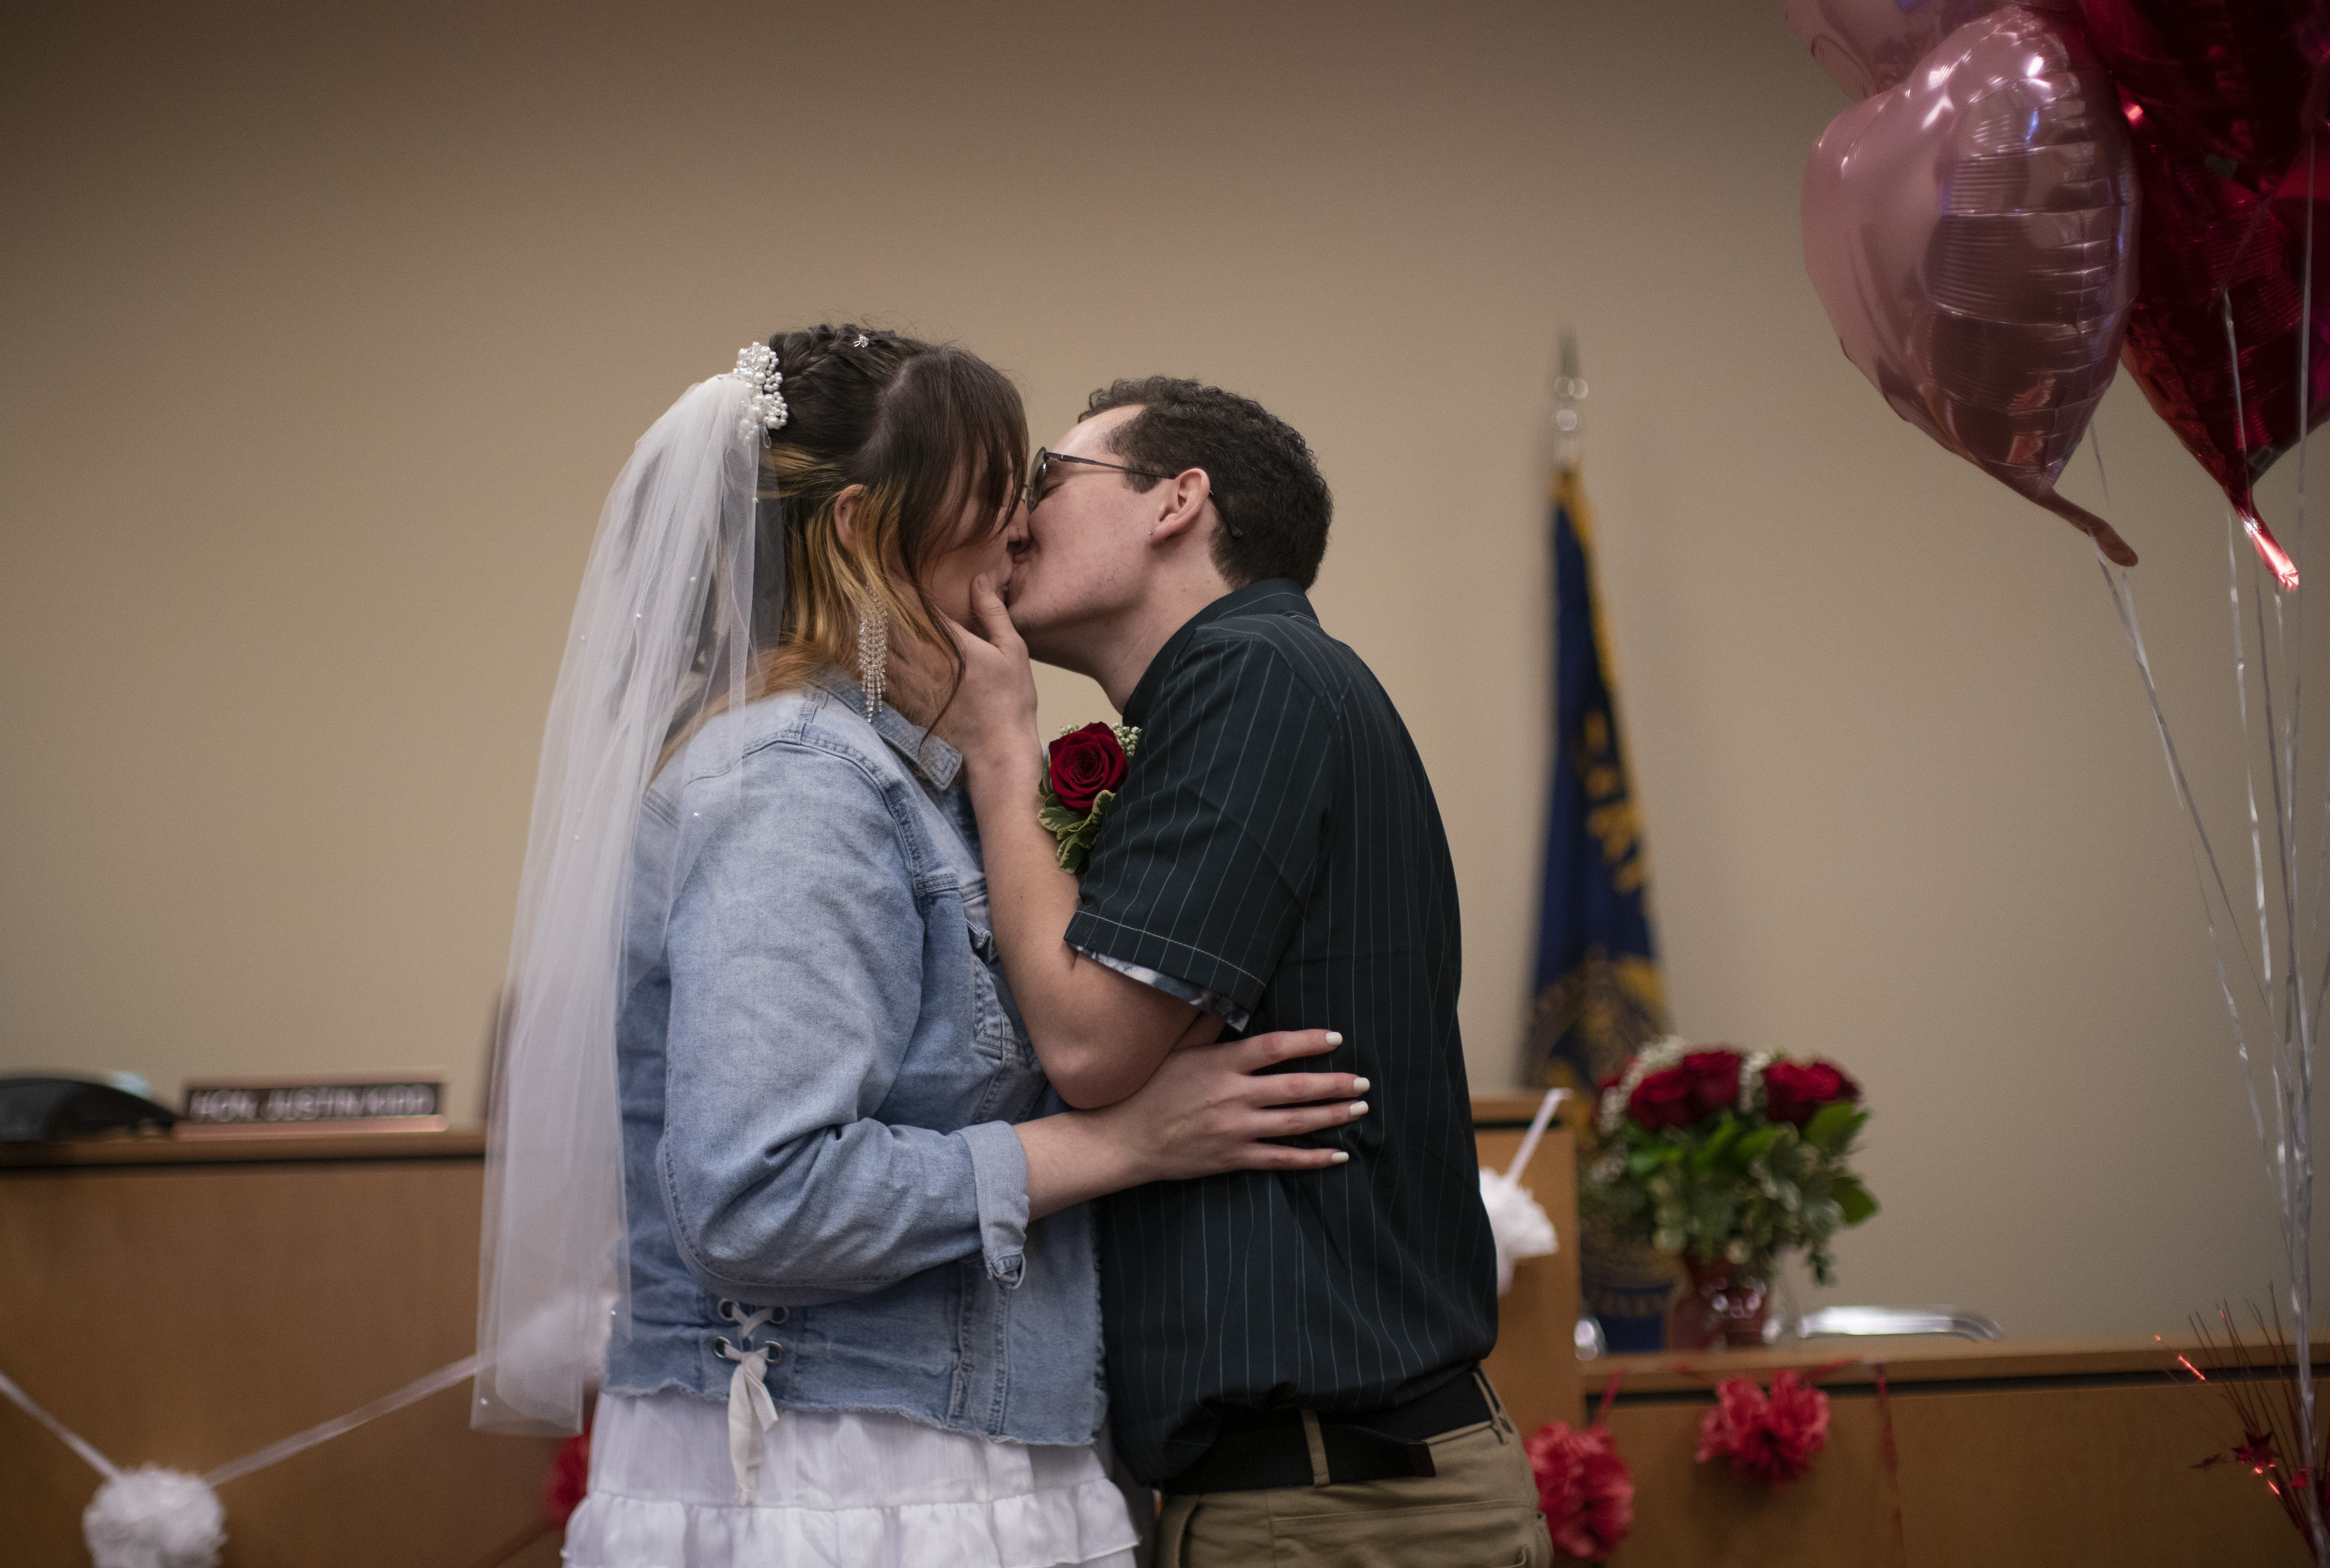 James and Reily Pichardo were married by Justice of the Peace Justin Kidd, who officiated weddings throughout the day at the Marion County Justice Court in Salem, February 14, 2023. Beth Nakamura/The Oregonian